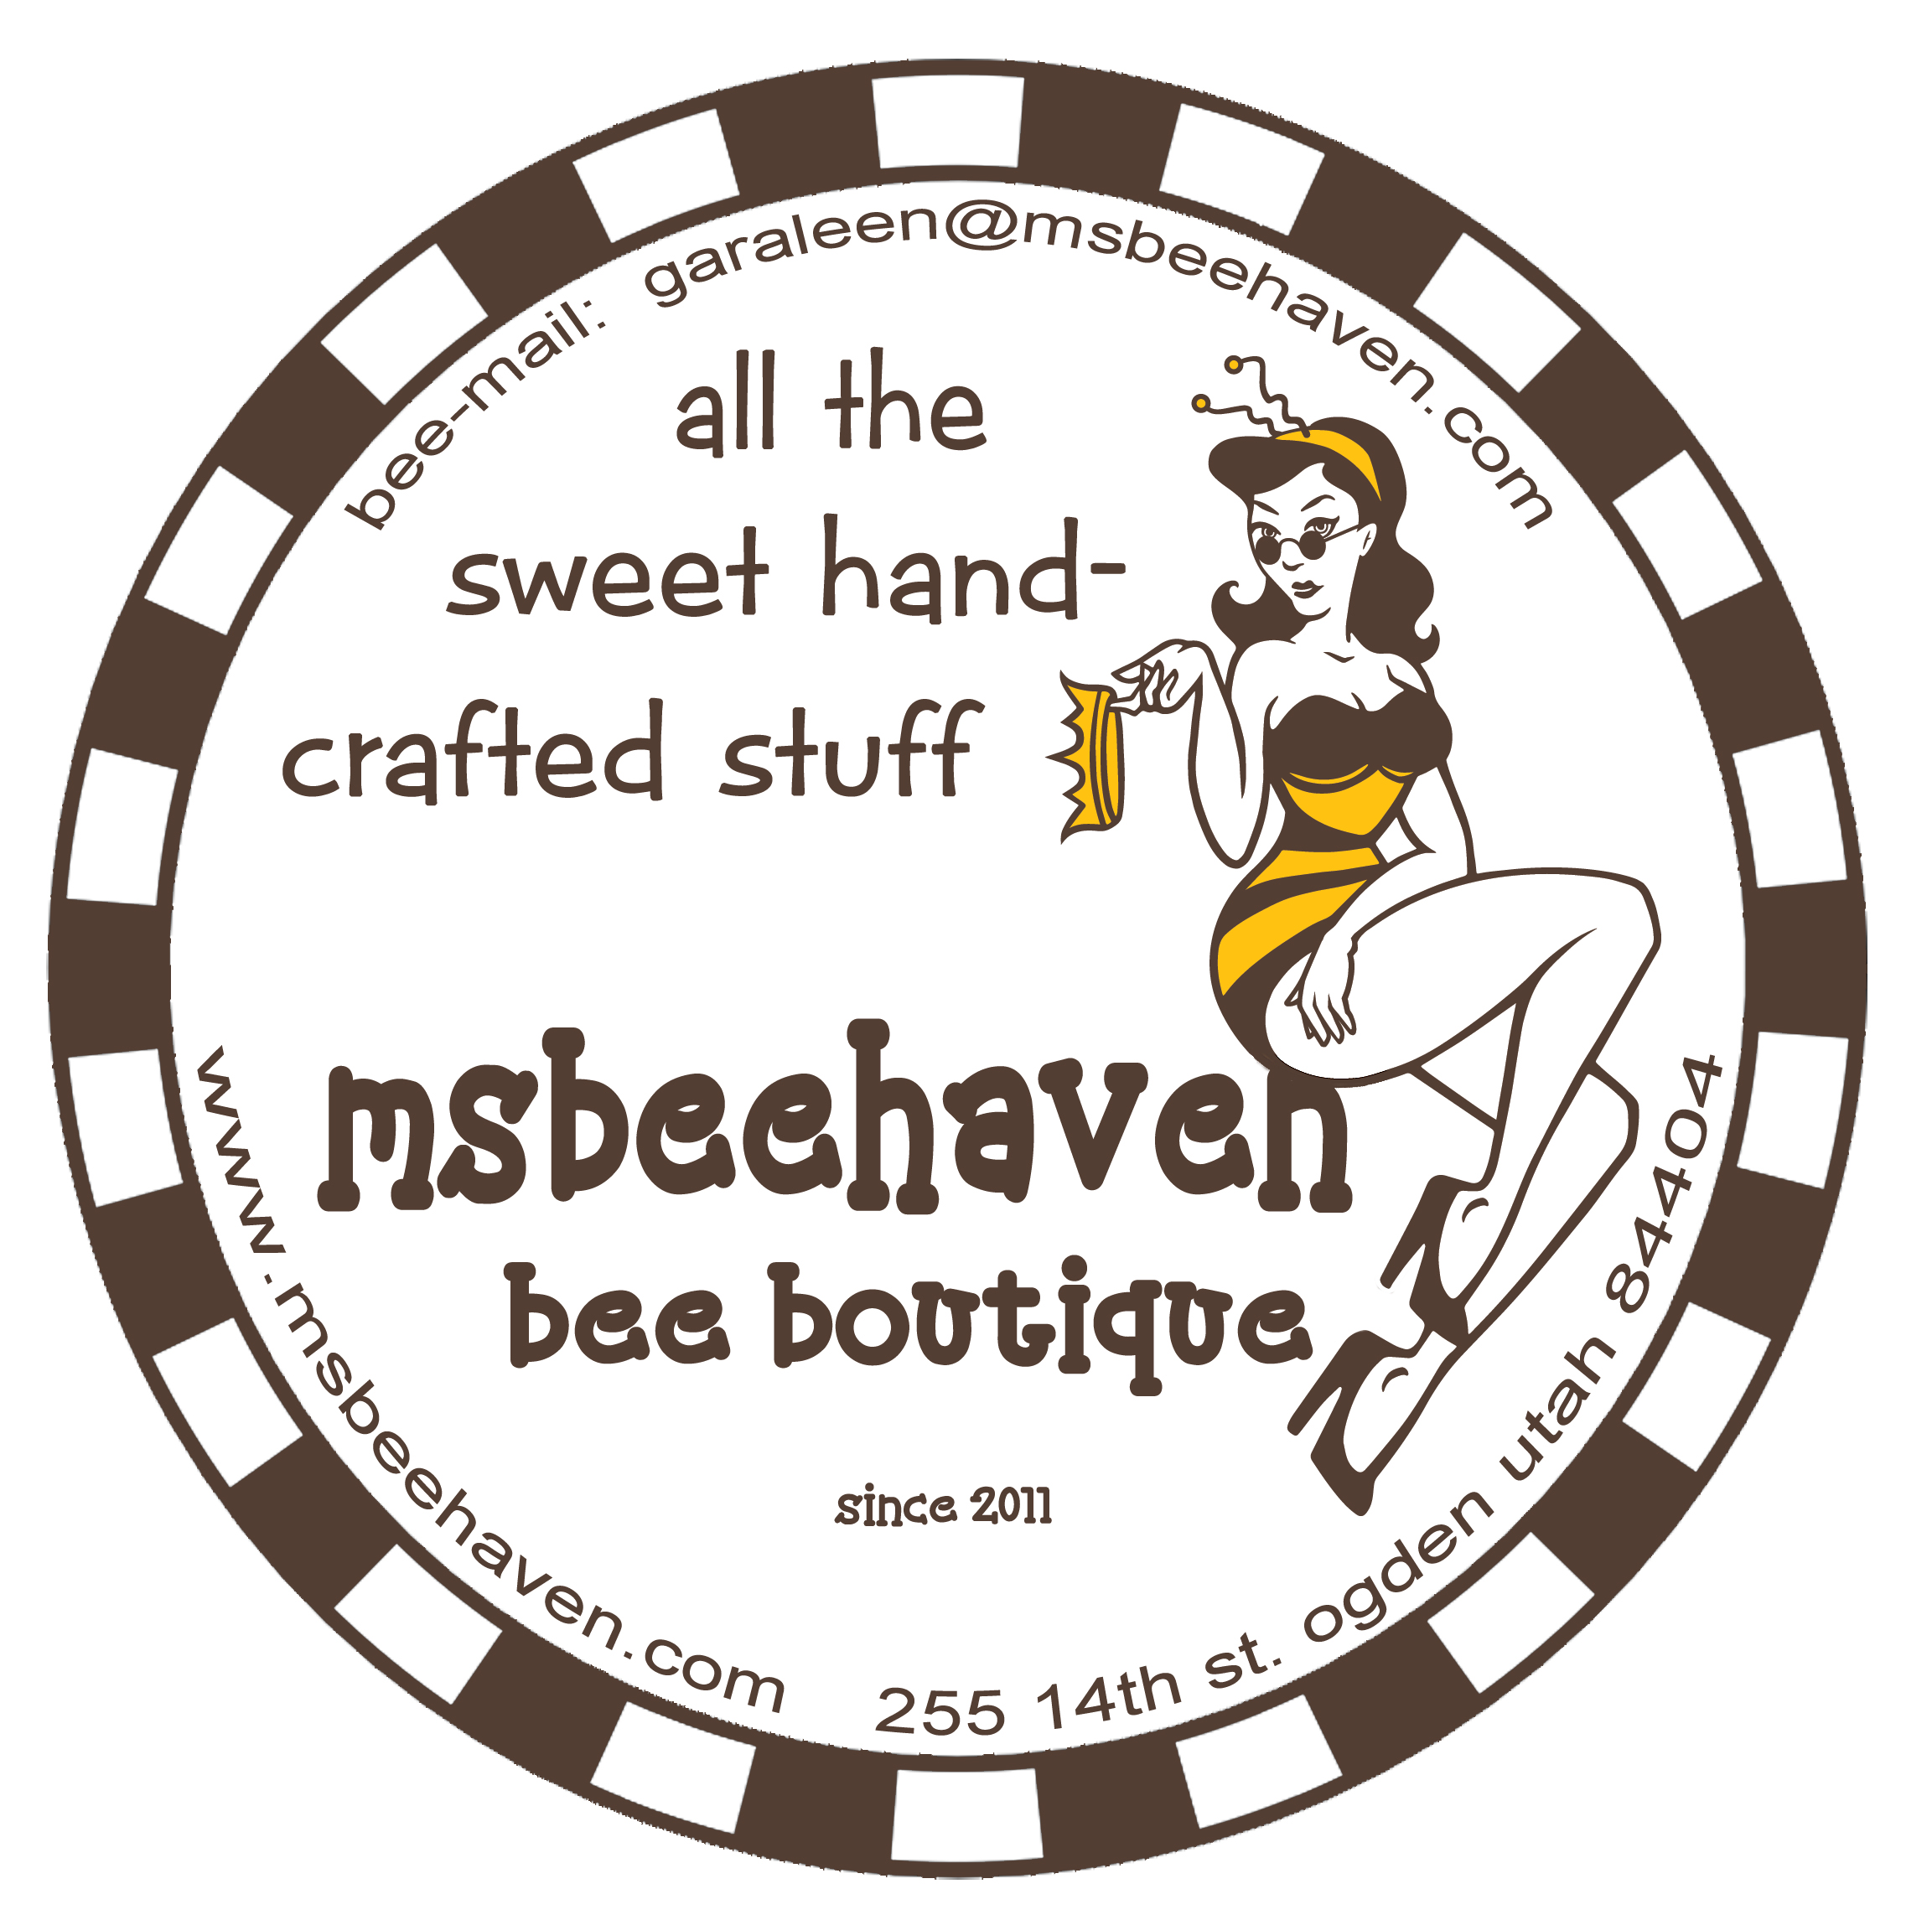 msbeehaven - all the sweet handcrafted stuff